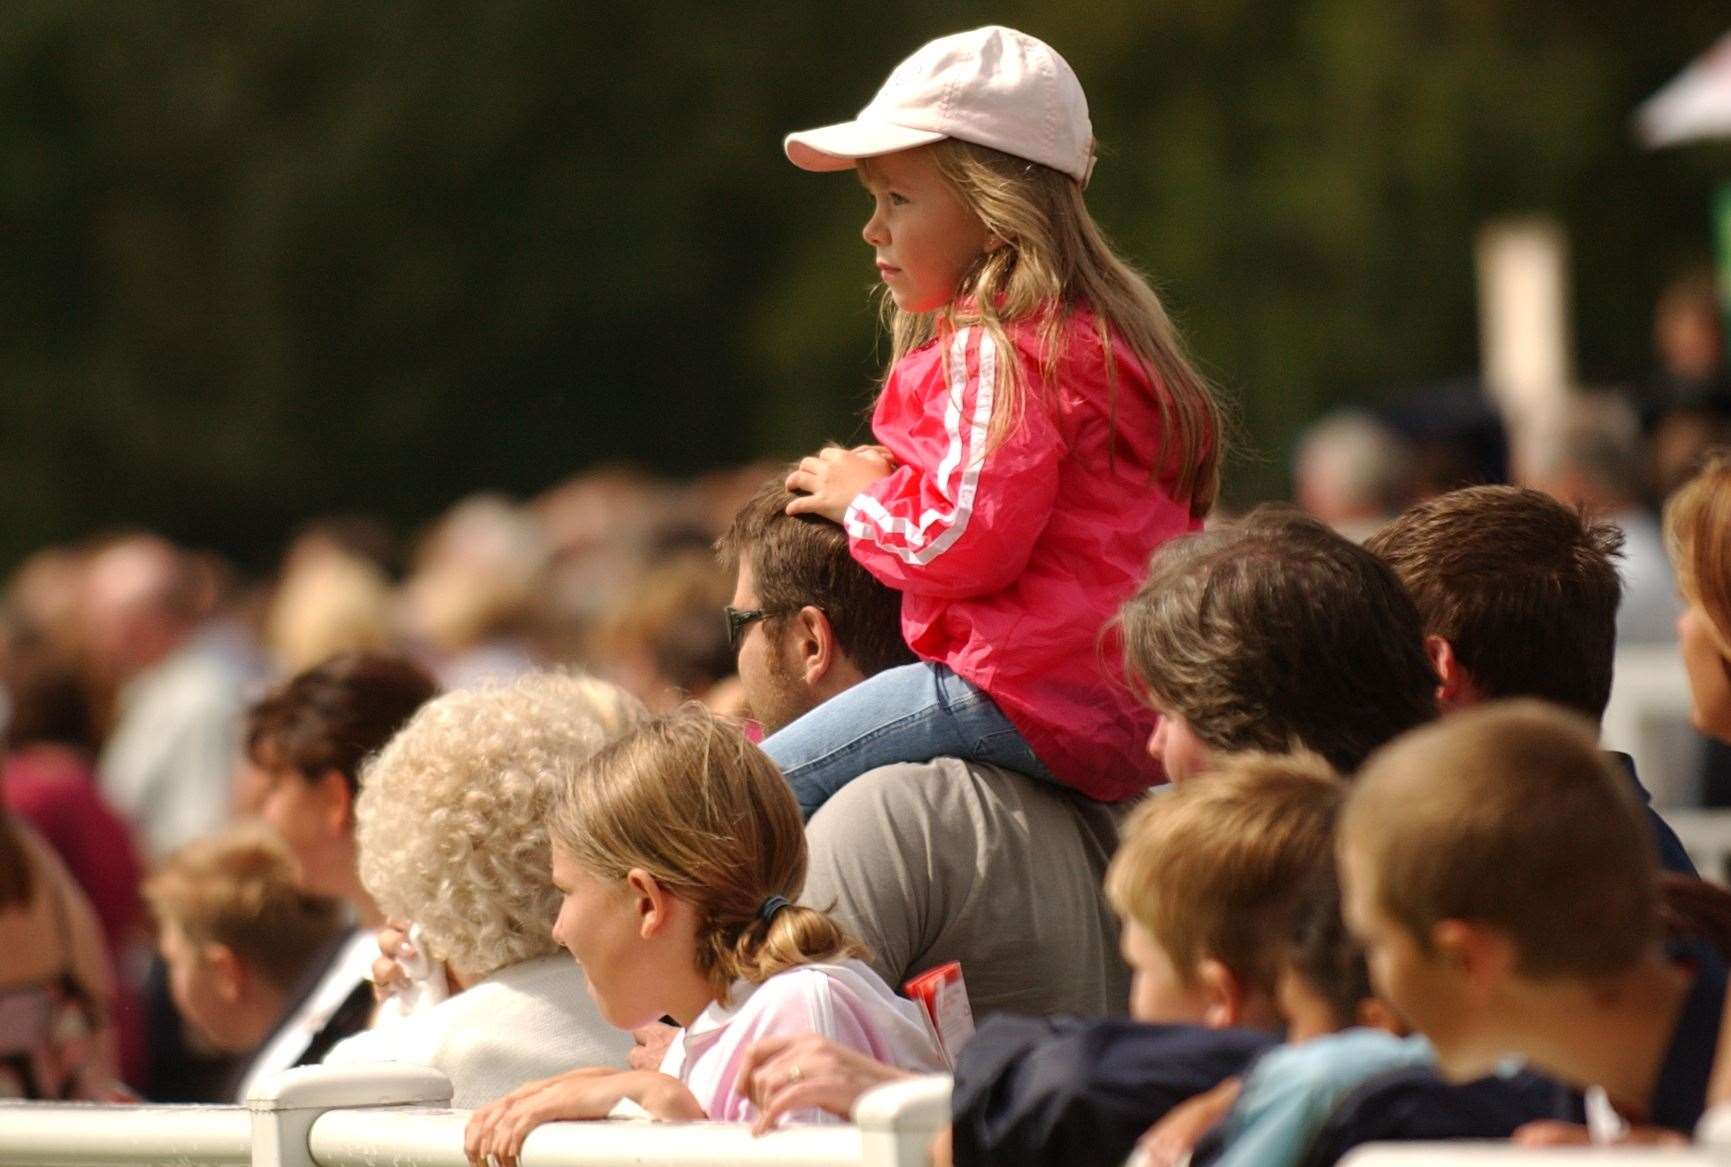 Many children enjoyed the racing over the years as parents took advantage of the free entry offer for those aged under 18